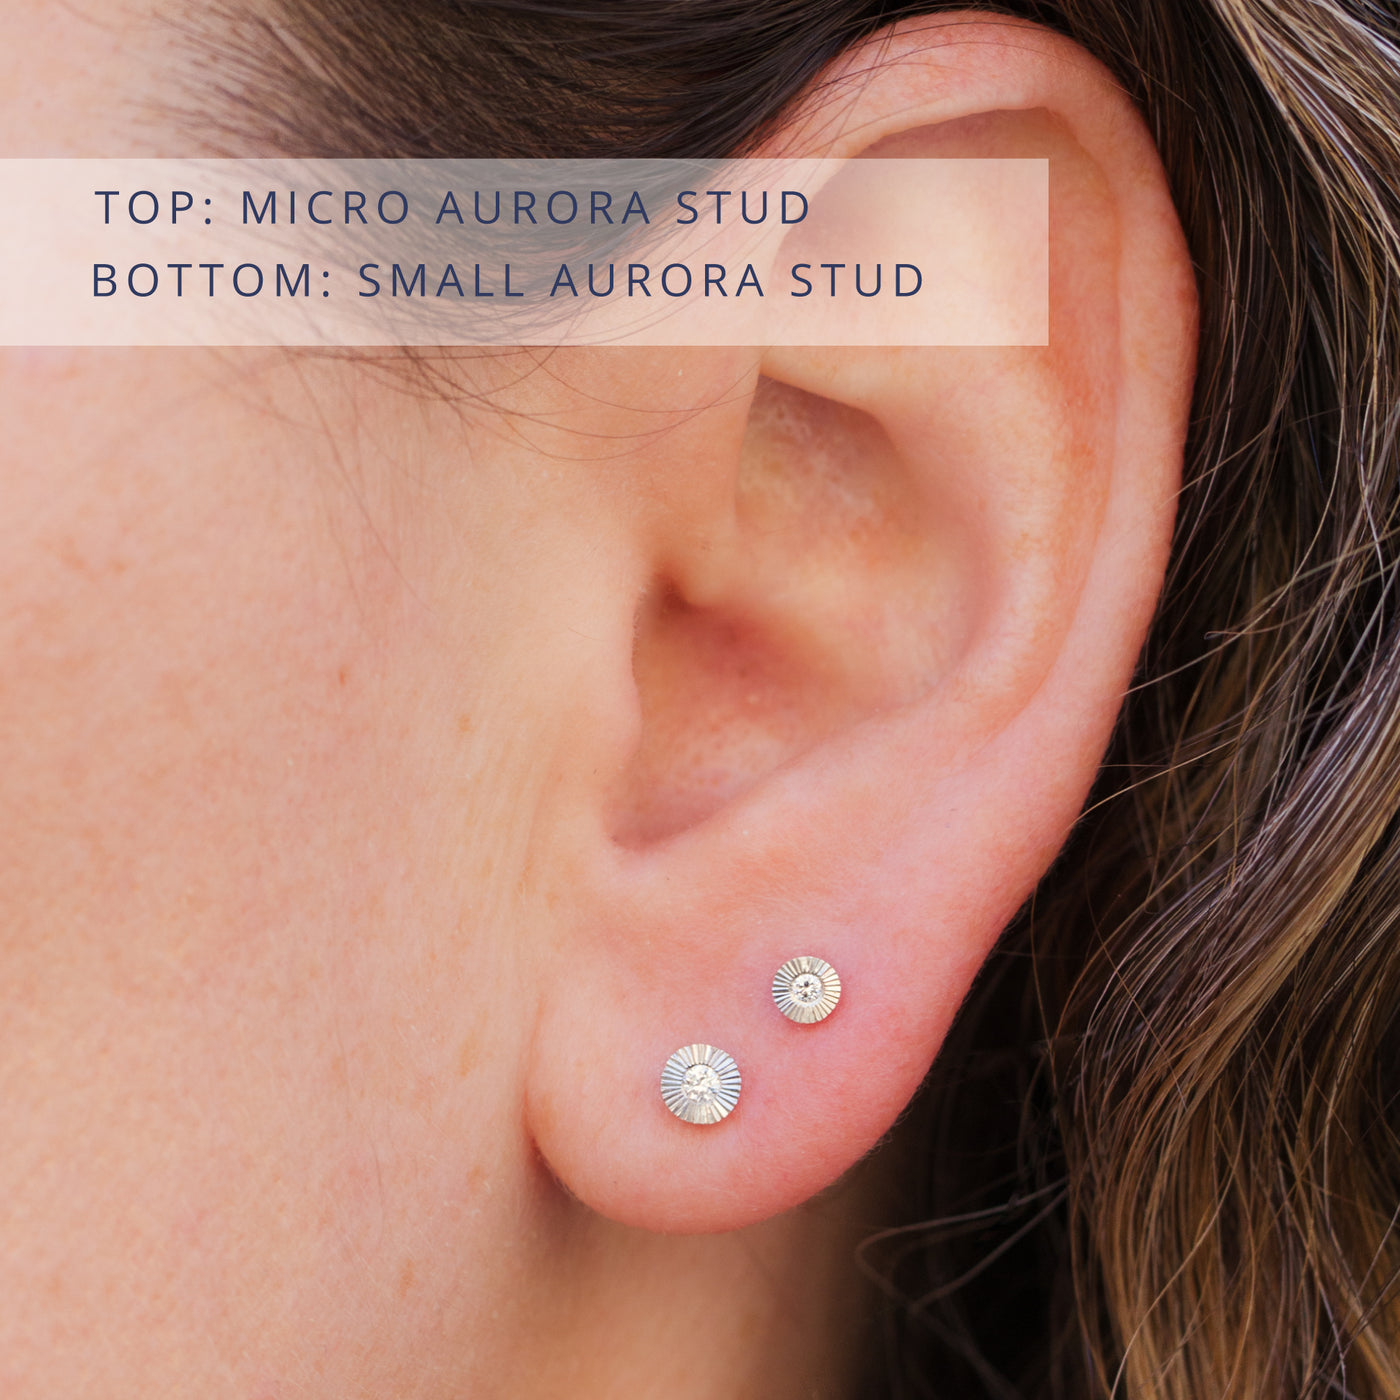 Silver and diamond aurora stud earrings on an ear. Top: micro size, Bottom: small size